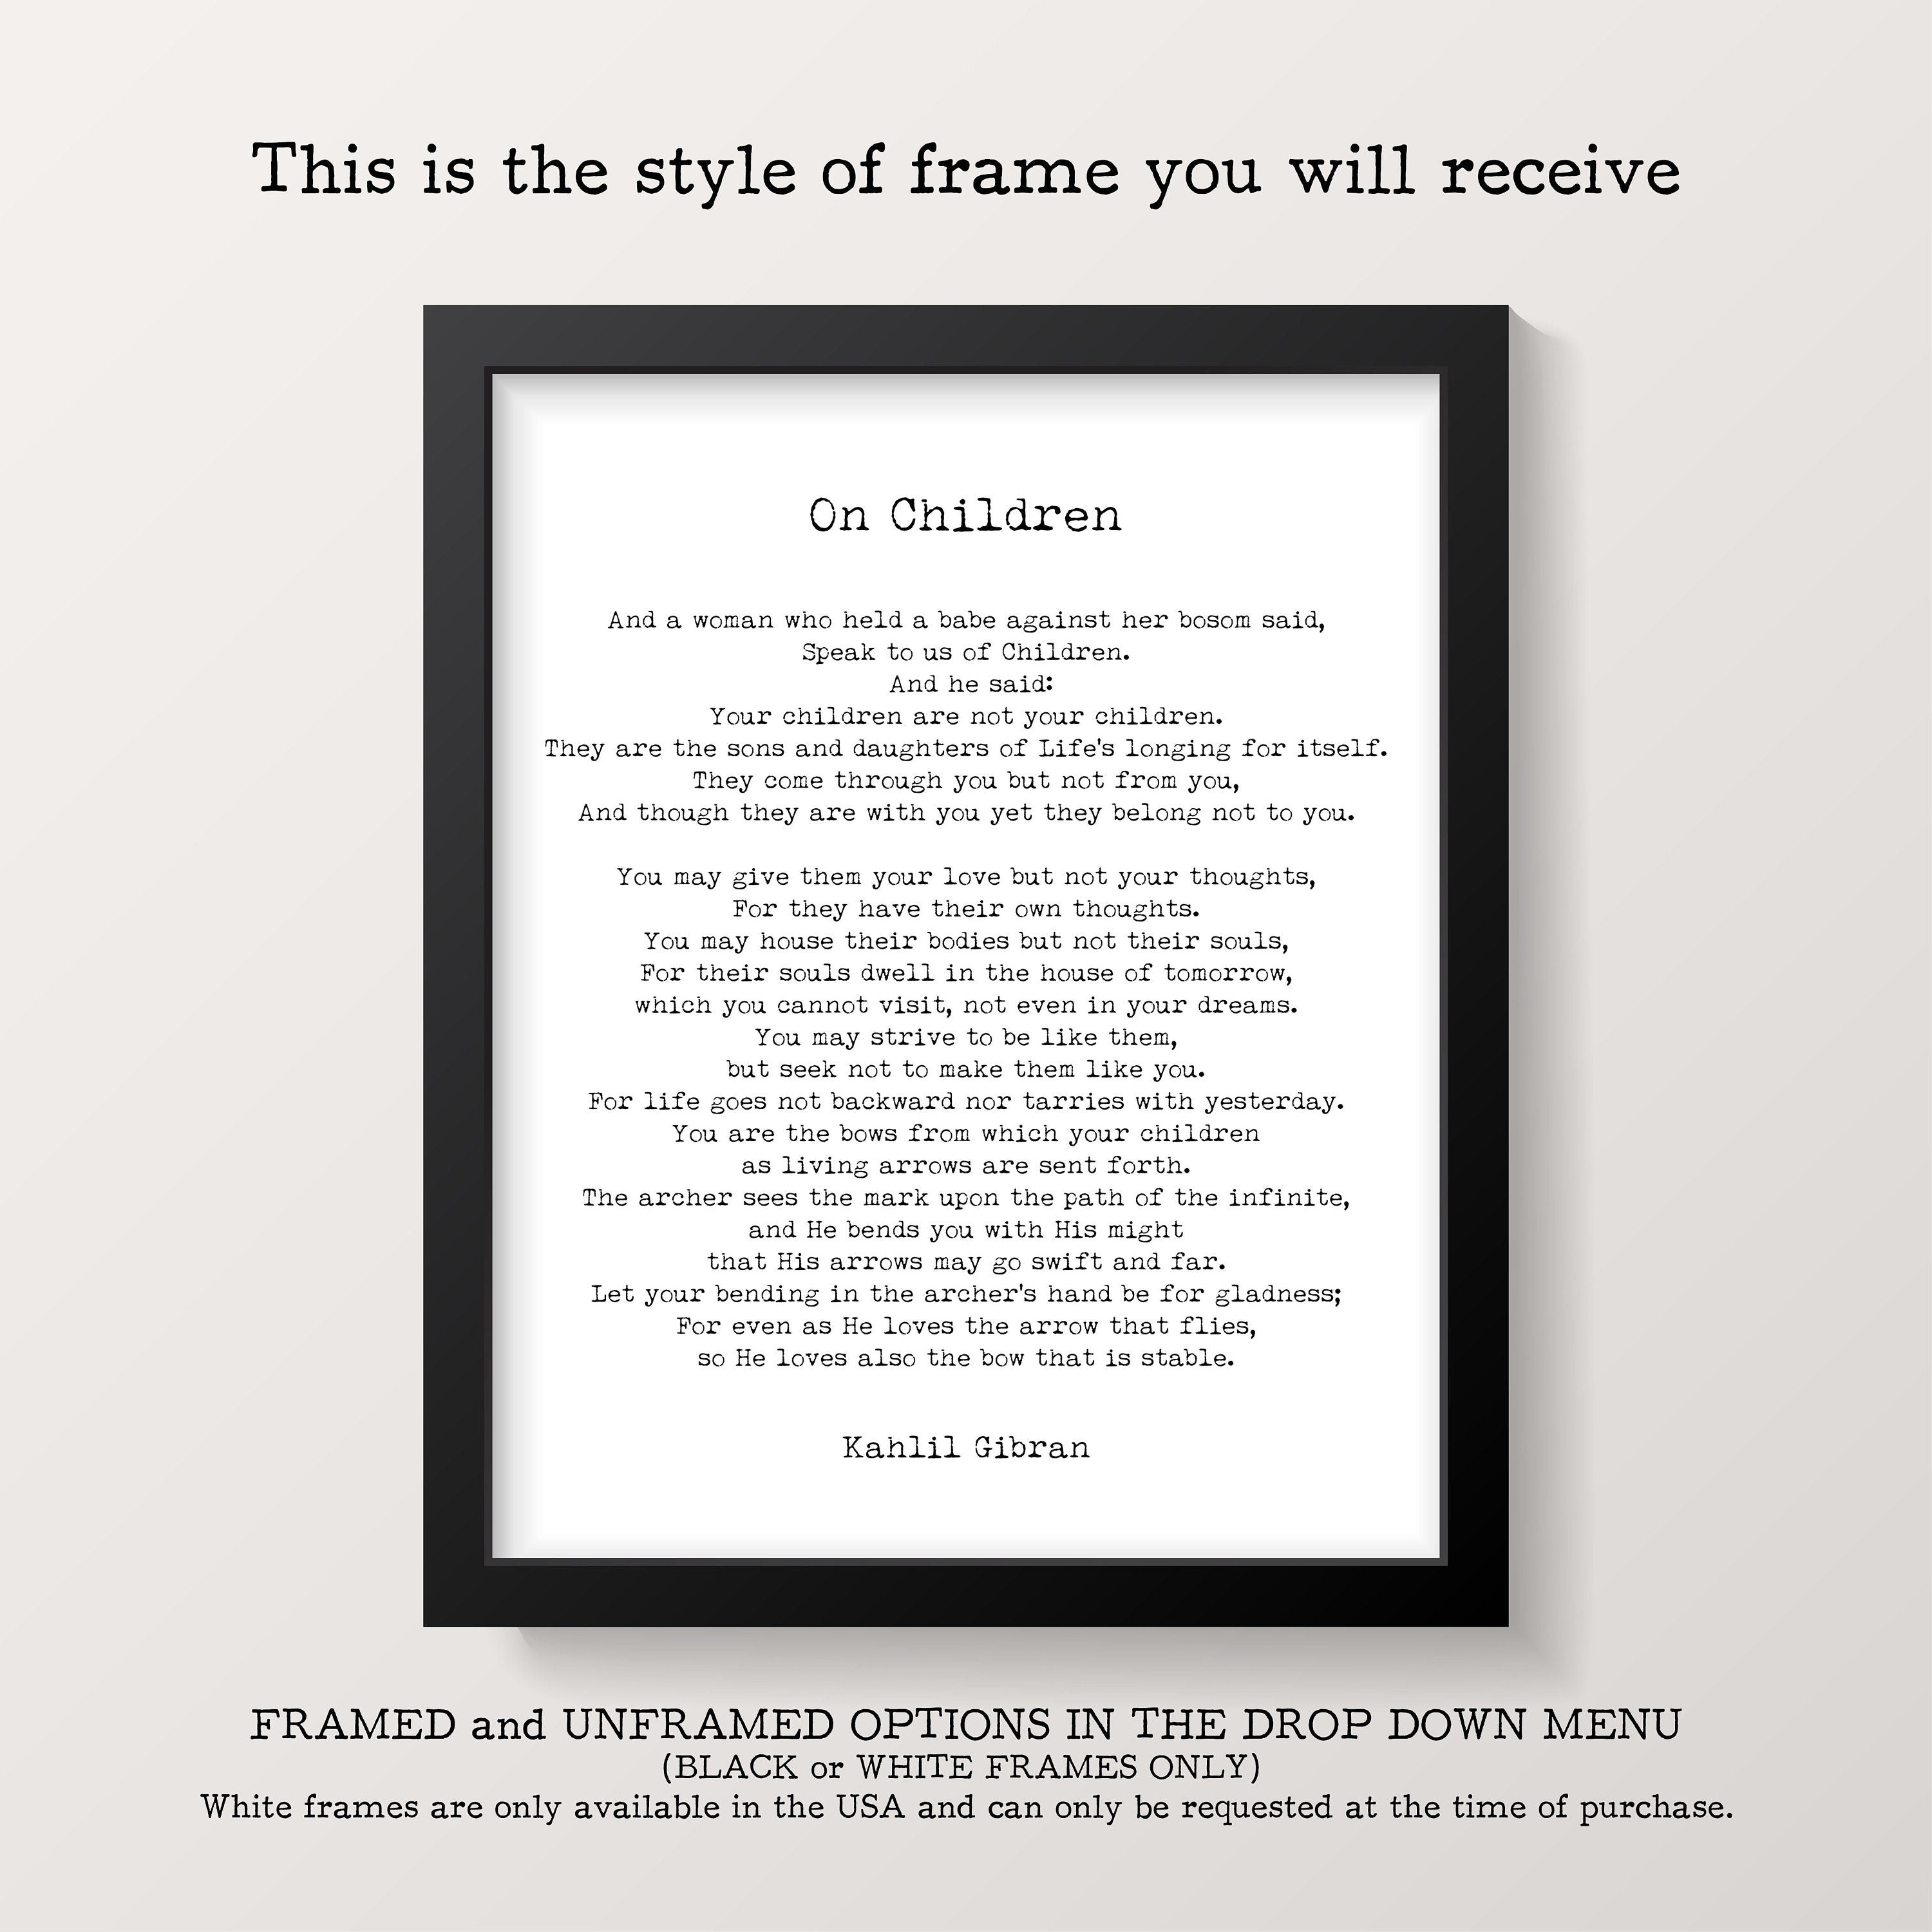 Kahlil Gibran On Marriage Poem Wall Art Print Framed or Unframed with Watercolor Botanical Detail, Love Poetry Literary Wall Art Decor